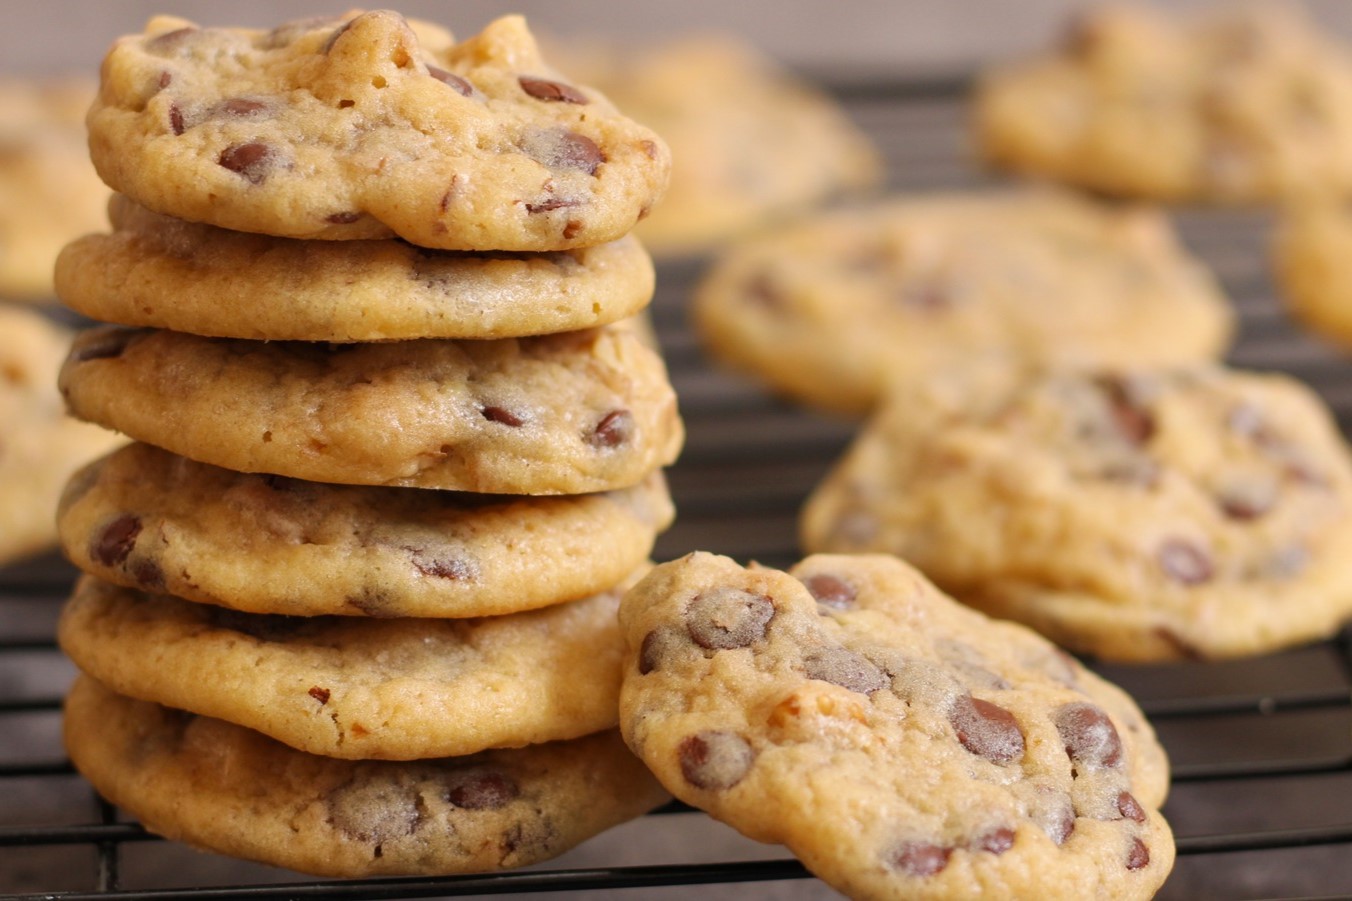 Make Perfect Cookies In Minutes With This Microwave Hack!